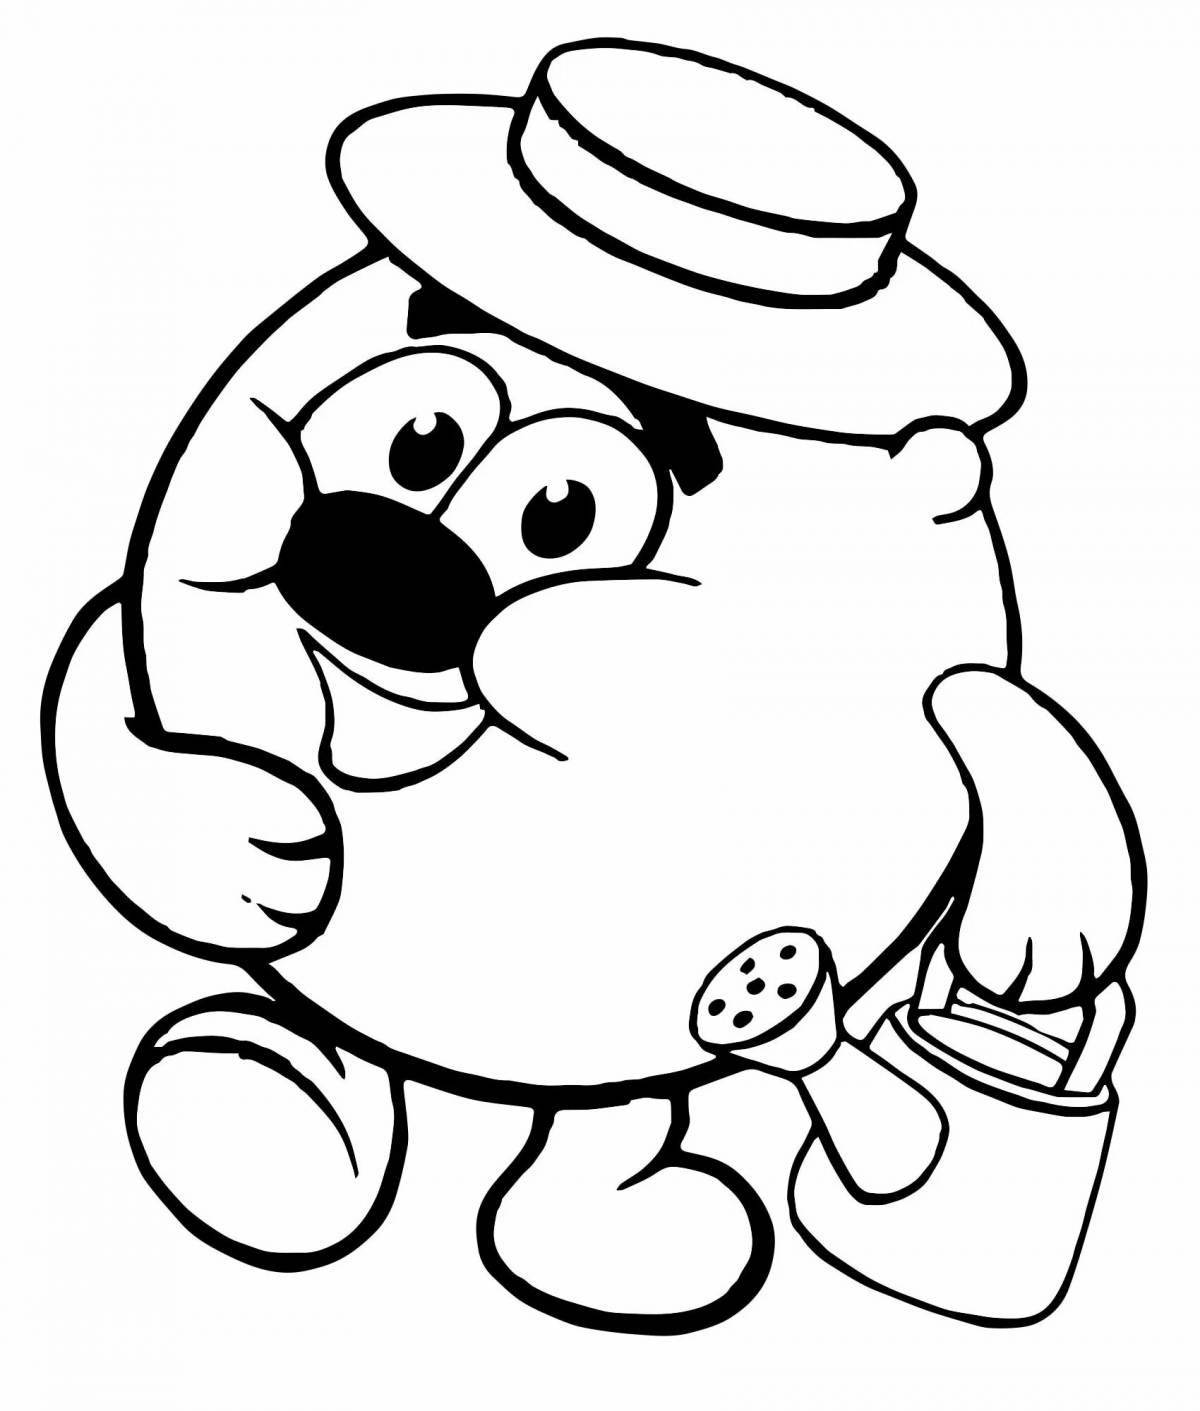 Color-fun coloring coloring page coloring book for children